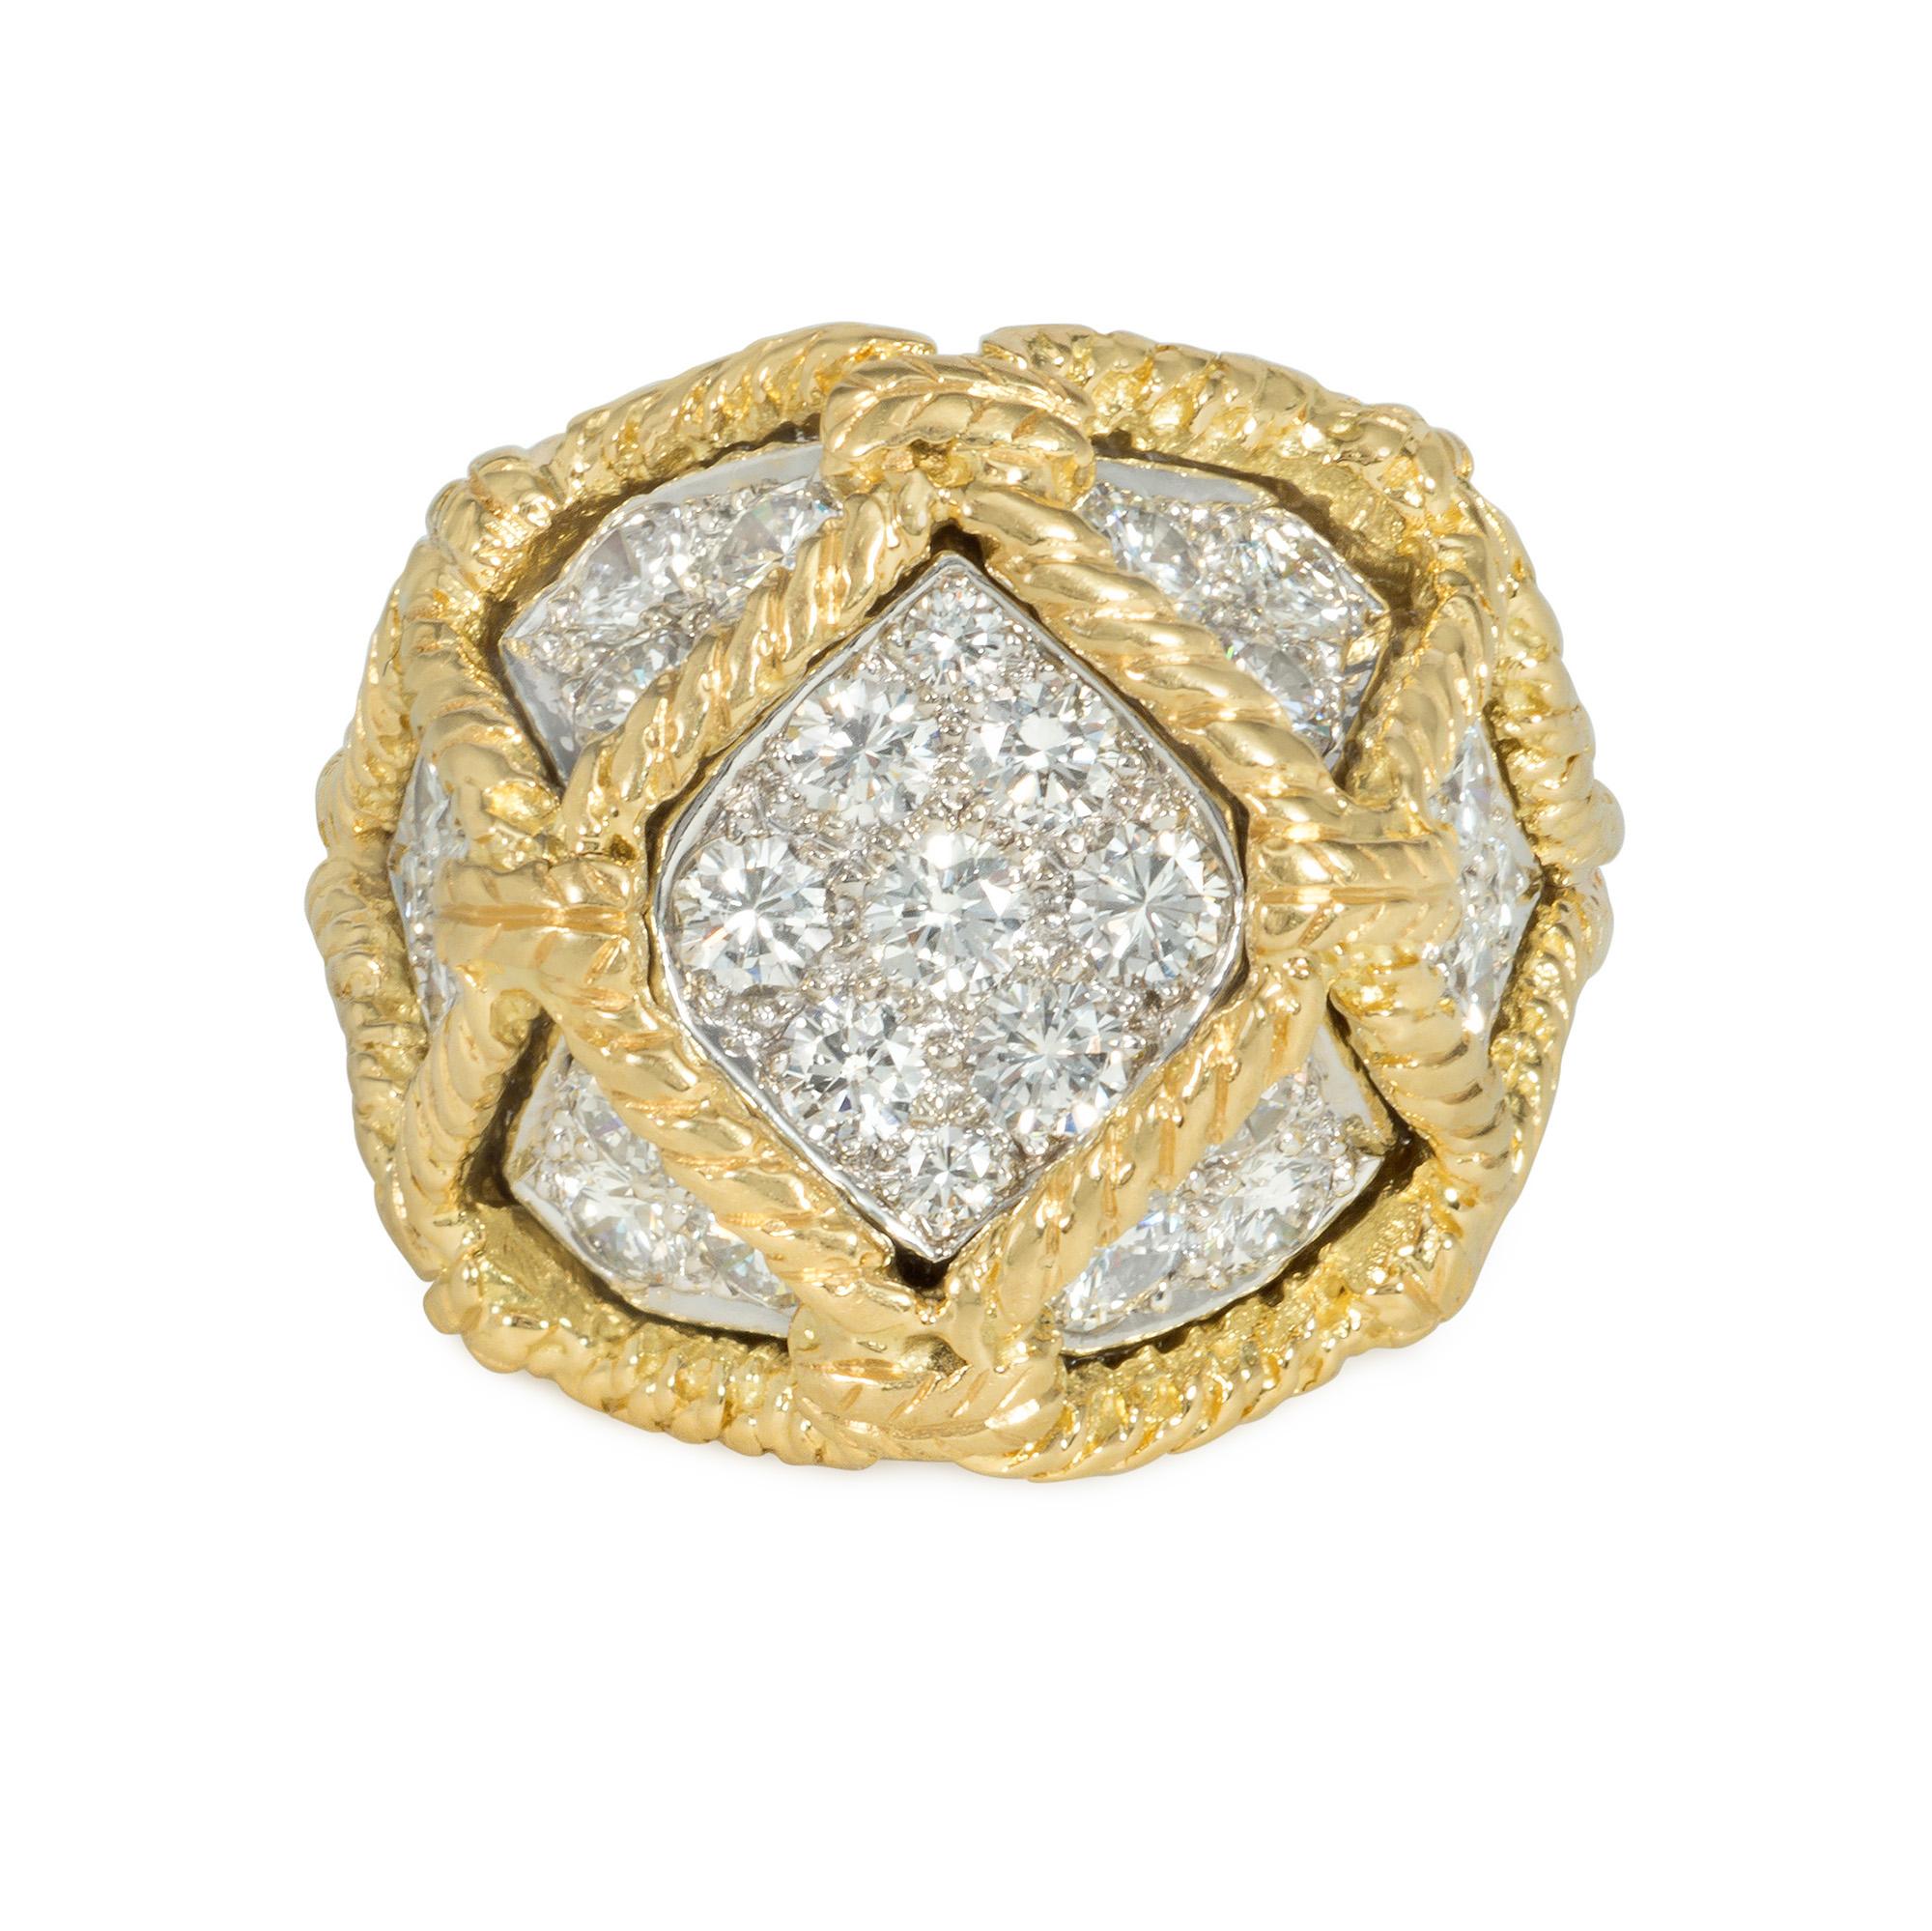 A mid-century gold and diamond cocktail ring of macramé design, comprising knotted gold rope overlaying pavé diamond panels in a lattice pattern, in platinum and 18k.  Hammerman Bros.  Atw 1.70 cts.  A uniquely eye-catching take on the nautical